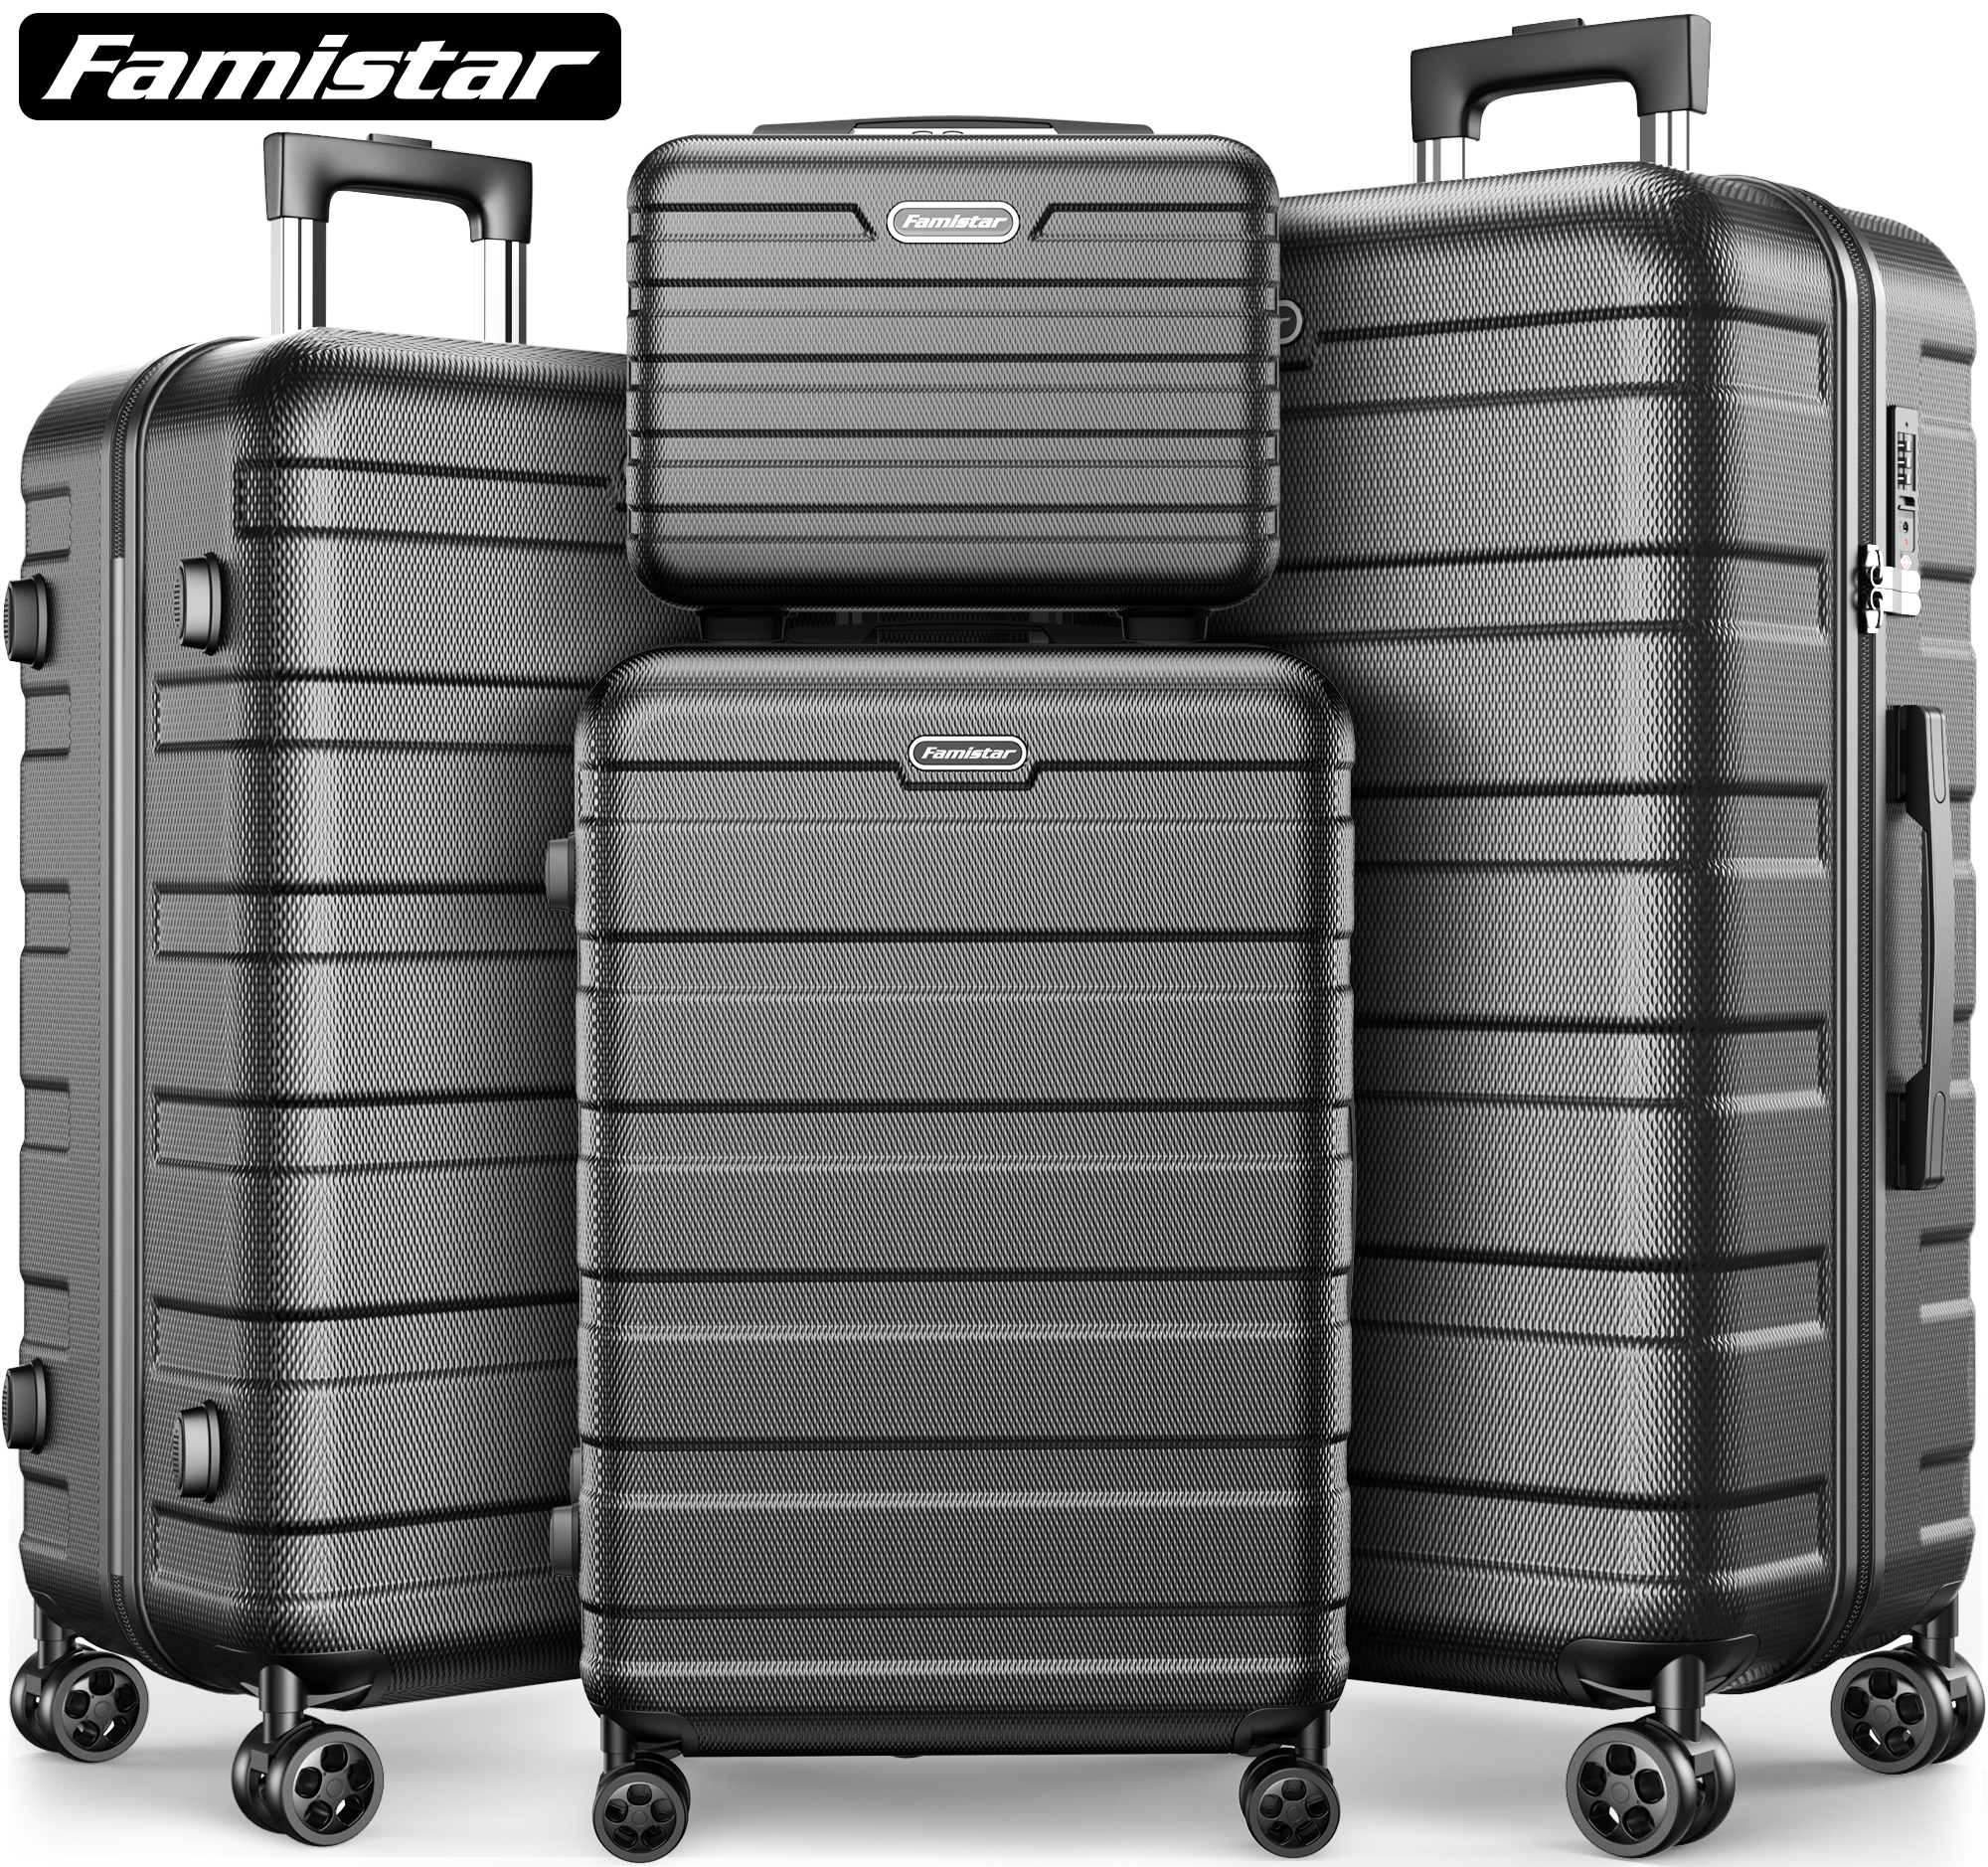 Famistar 4 Piece Hardside Luggage Suitcase Set with 360° Double Spinner Wheels Integrated TSA Lock, 14” Travel Case, 20" Carry-On Luggage, 24" Checked Luggage and 28" Checked Luggage, Black - image 1 of 11